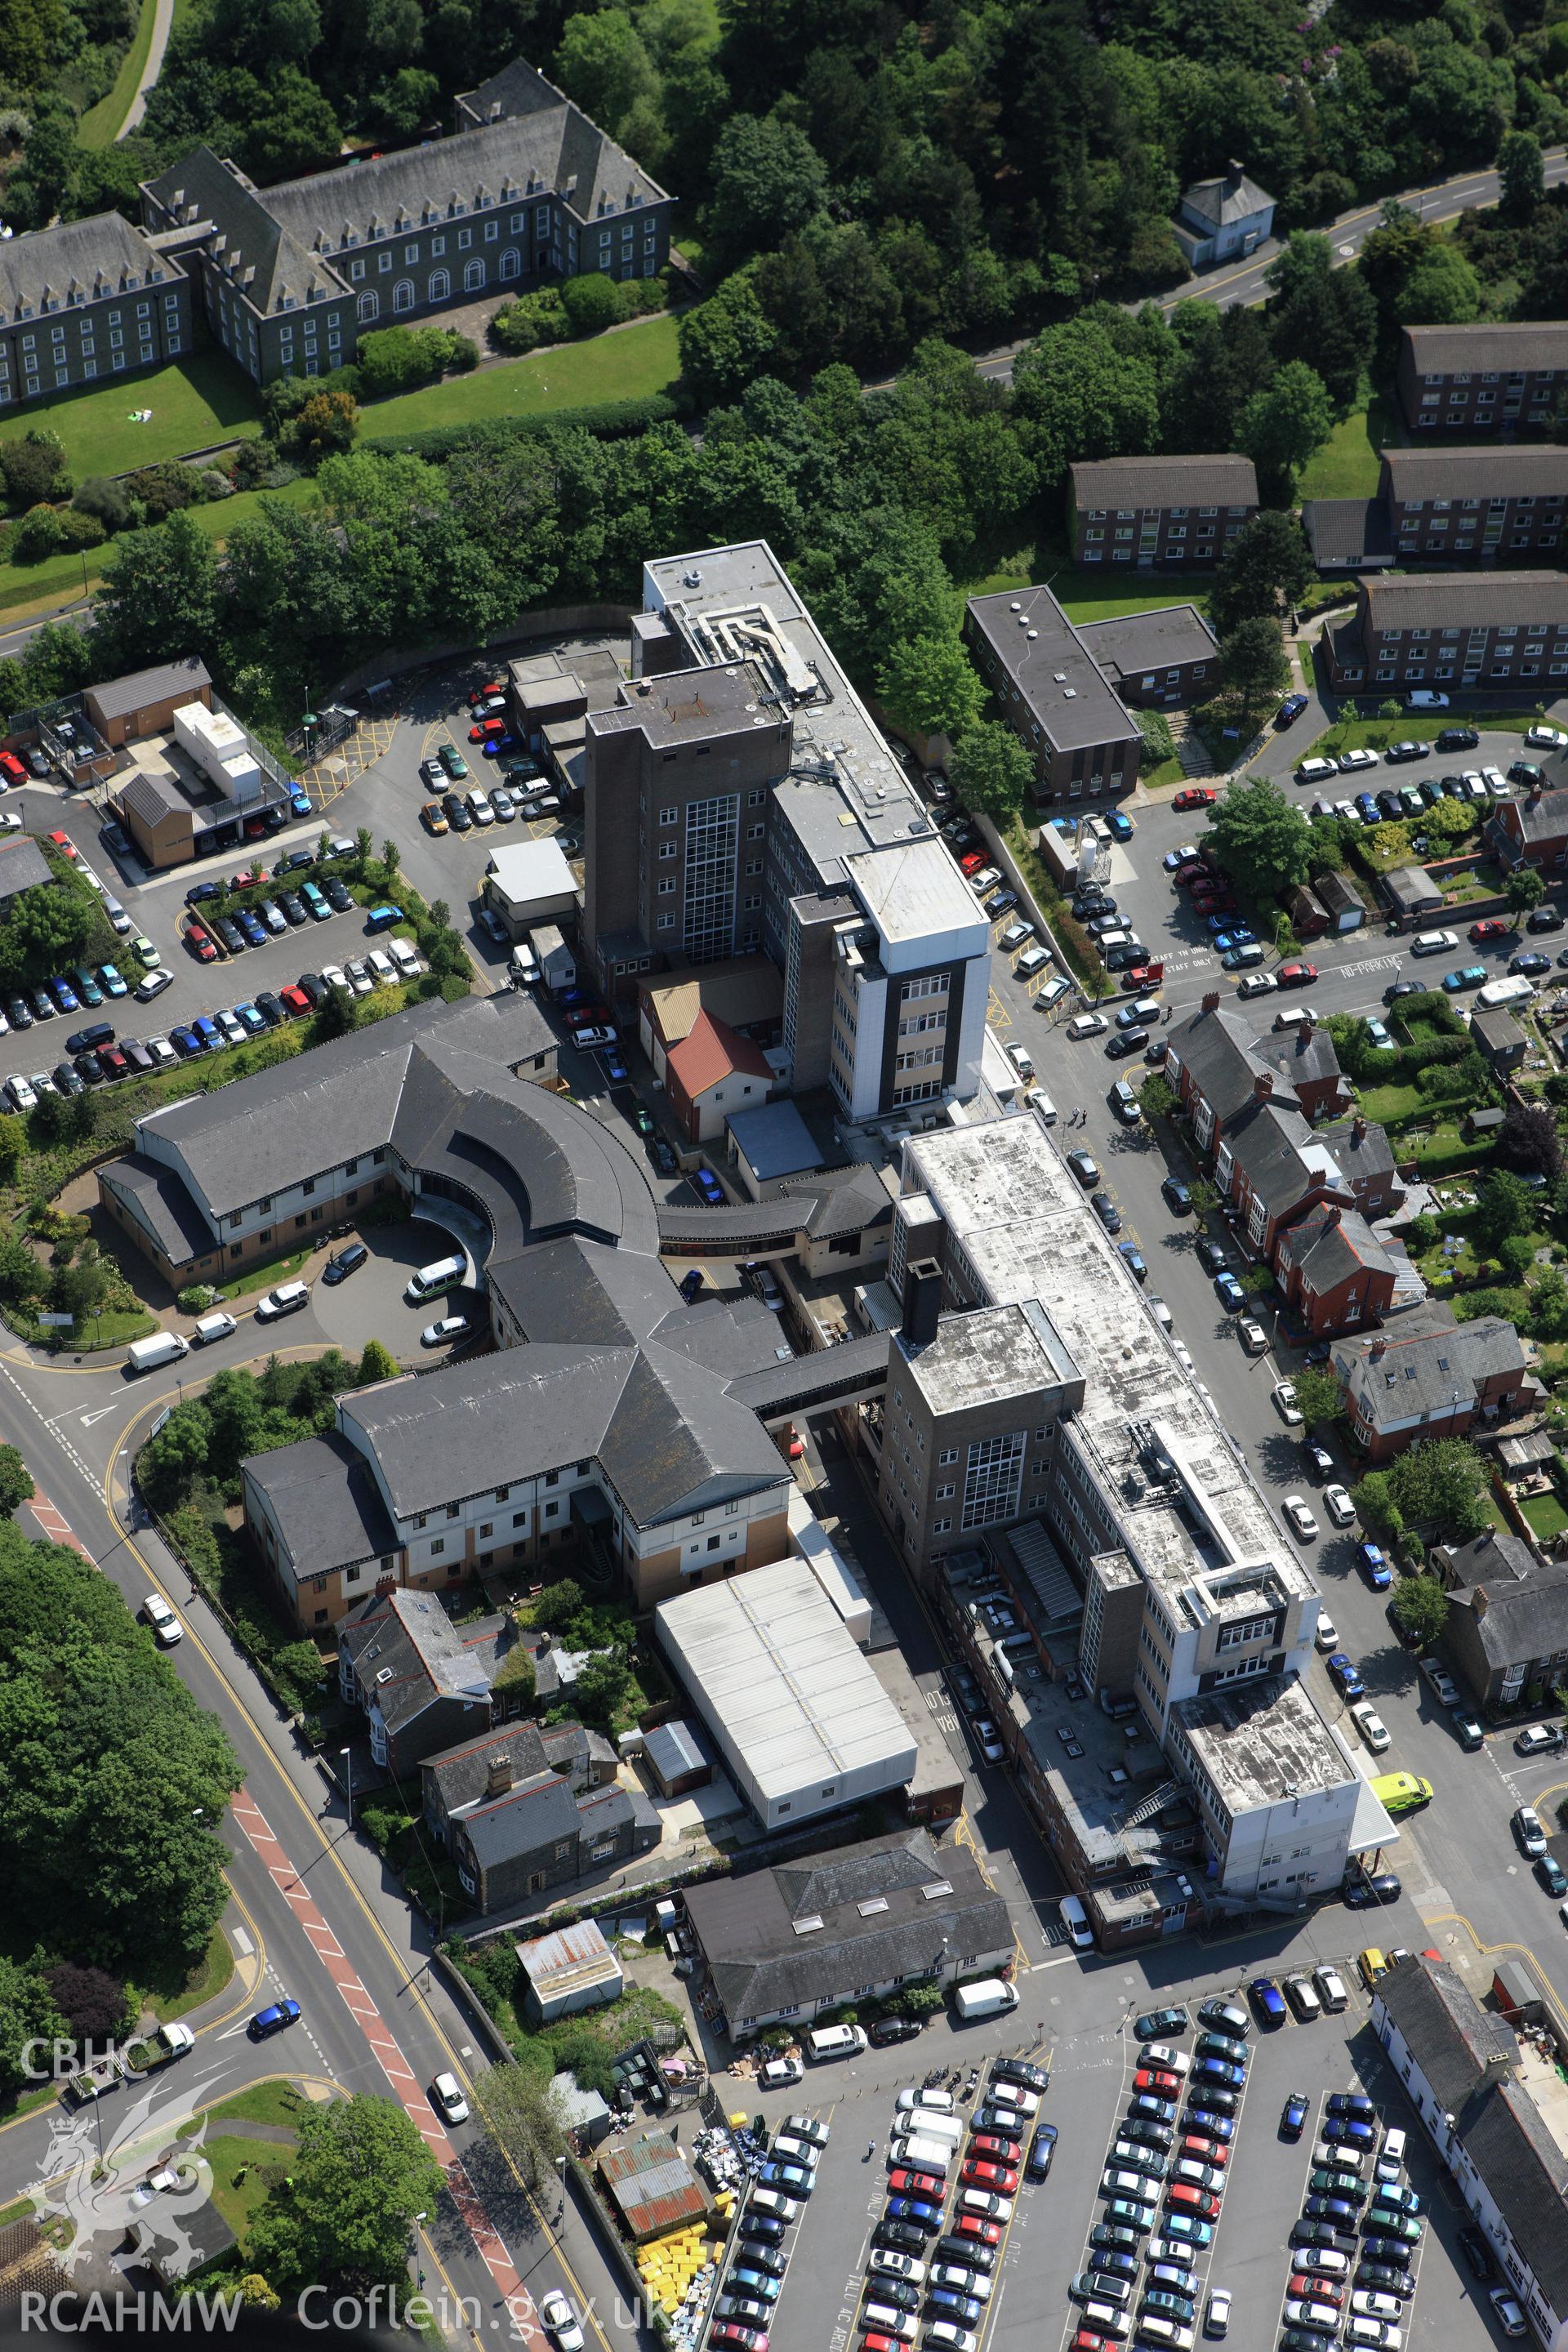 RCAHMW colour oblique aerial photograph of Bronglais Hospital. Taken on 02 June 2009 by Toby Driver